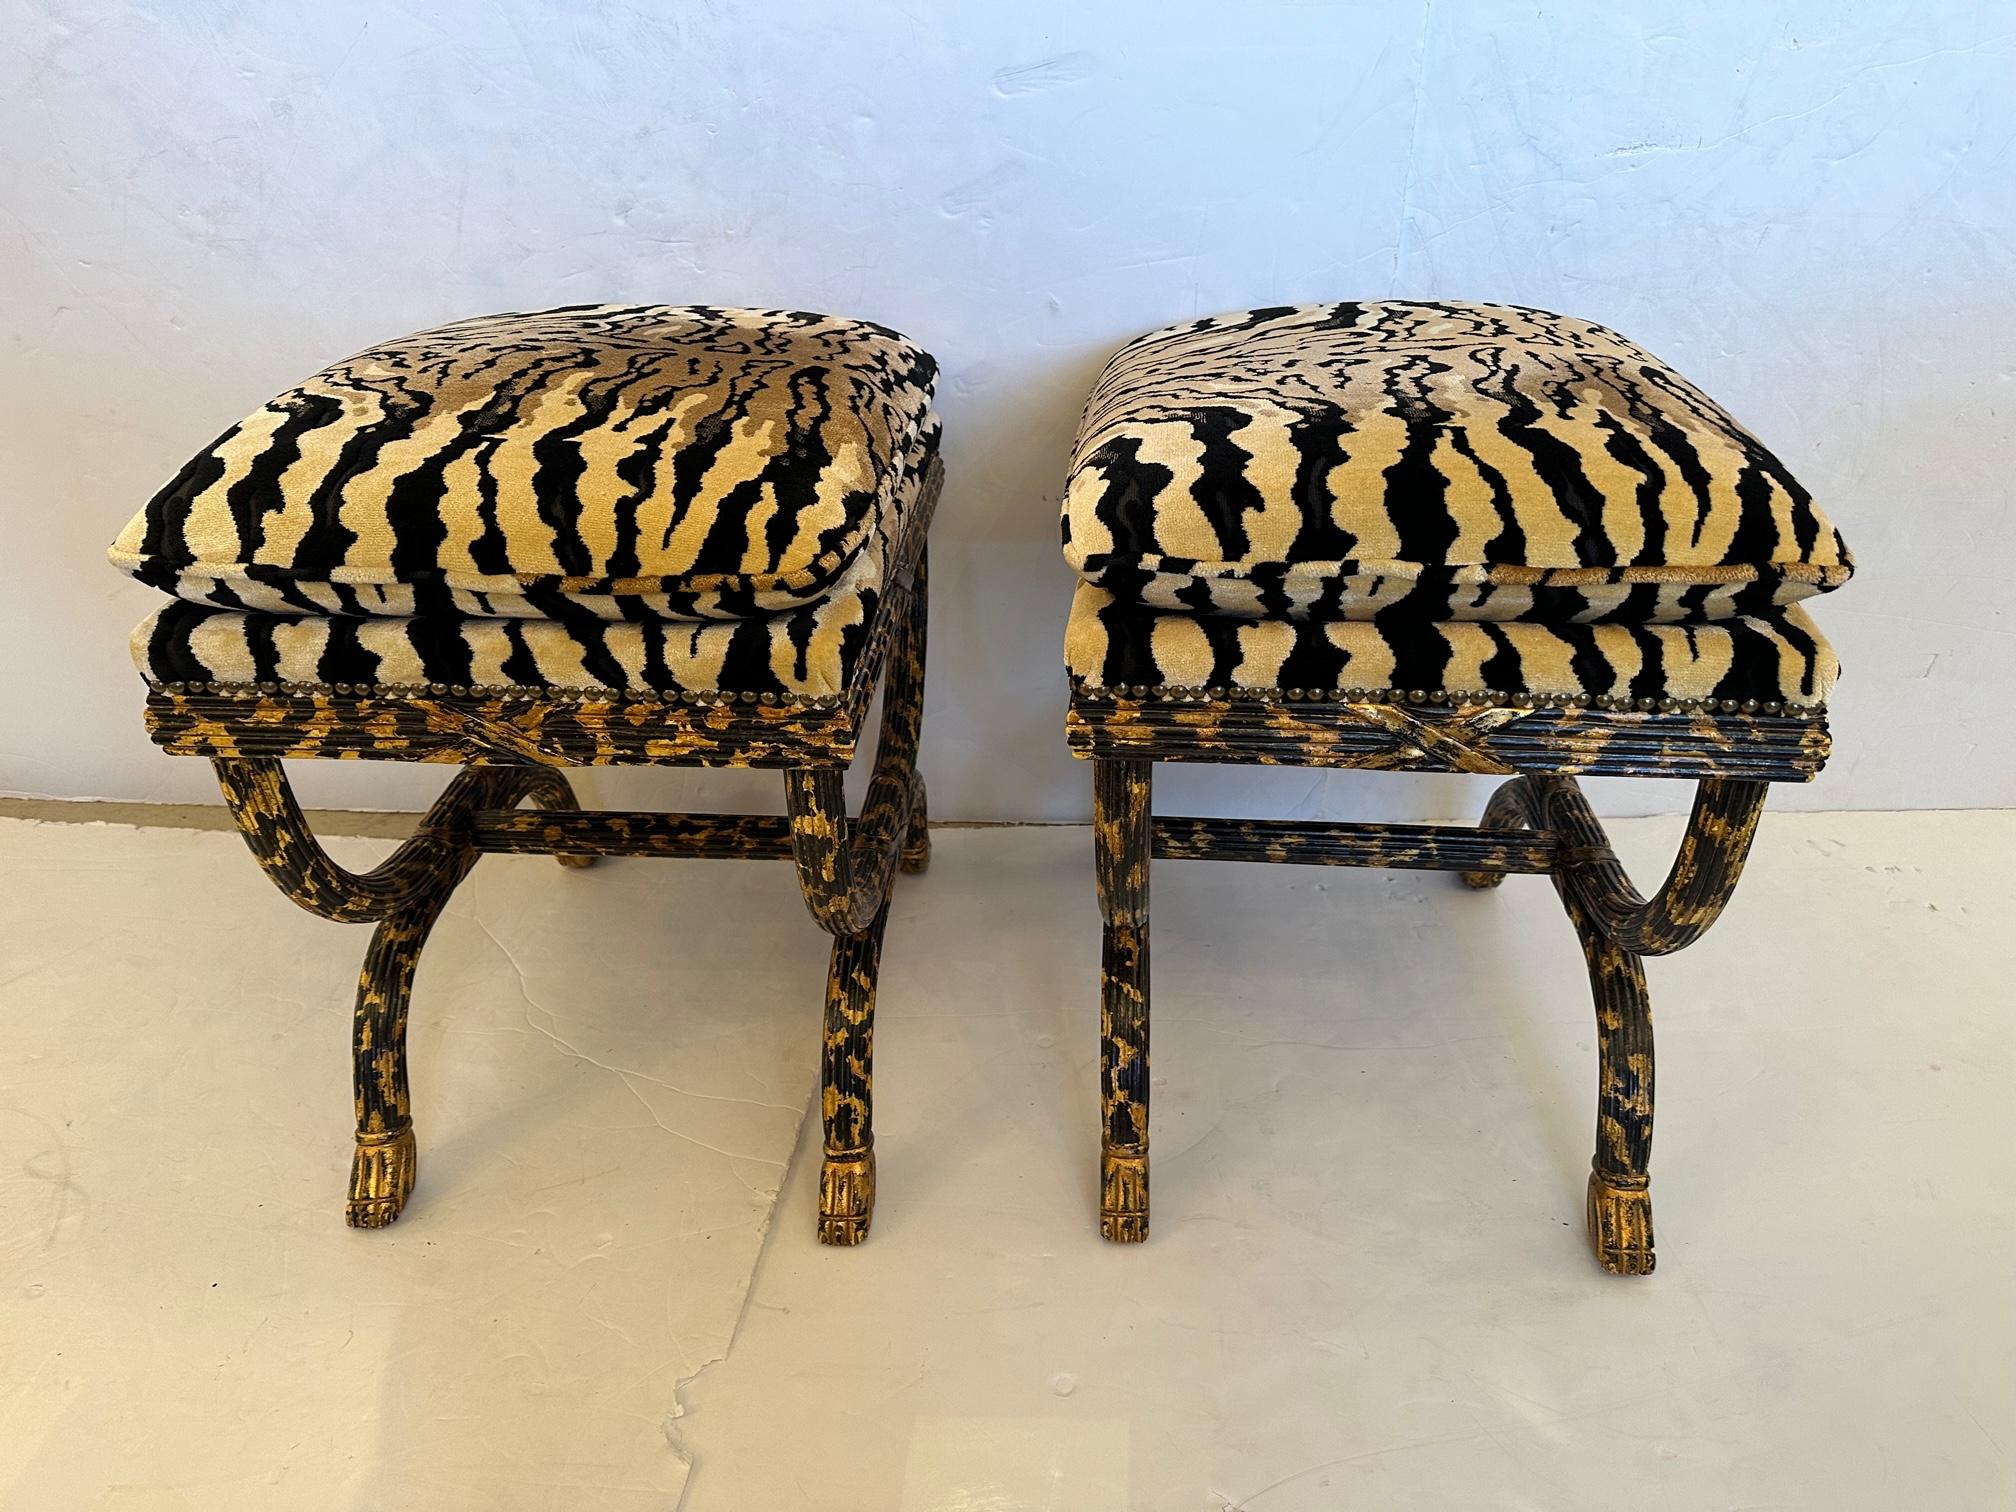 Contemporary Amazing Glam Pair of Neoclassical Animal Print Ottomans by William Switzer